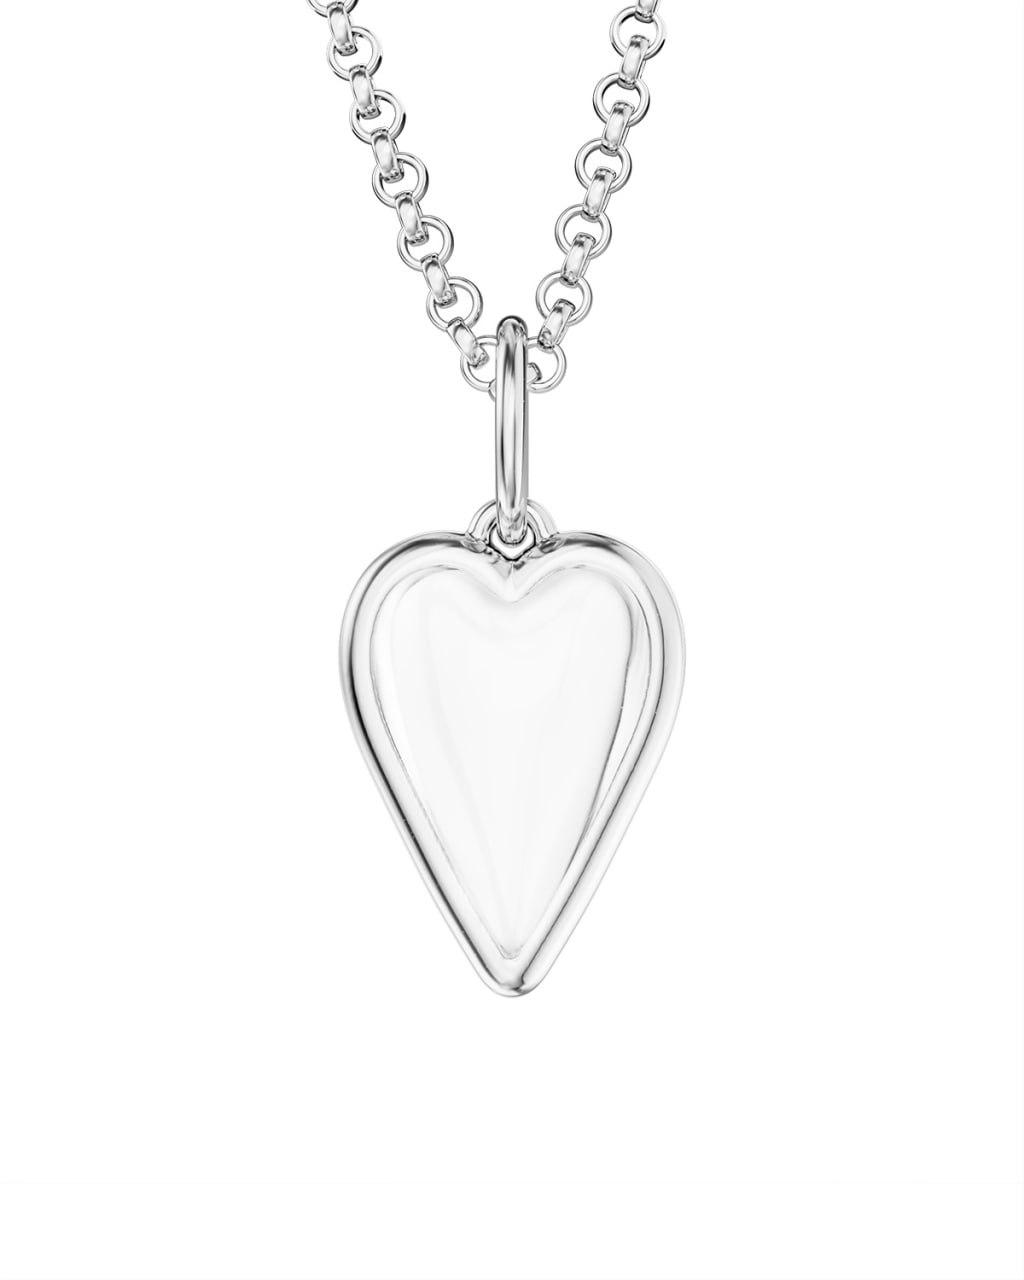 Small Rock Crystal Heart Pendant Necklace